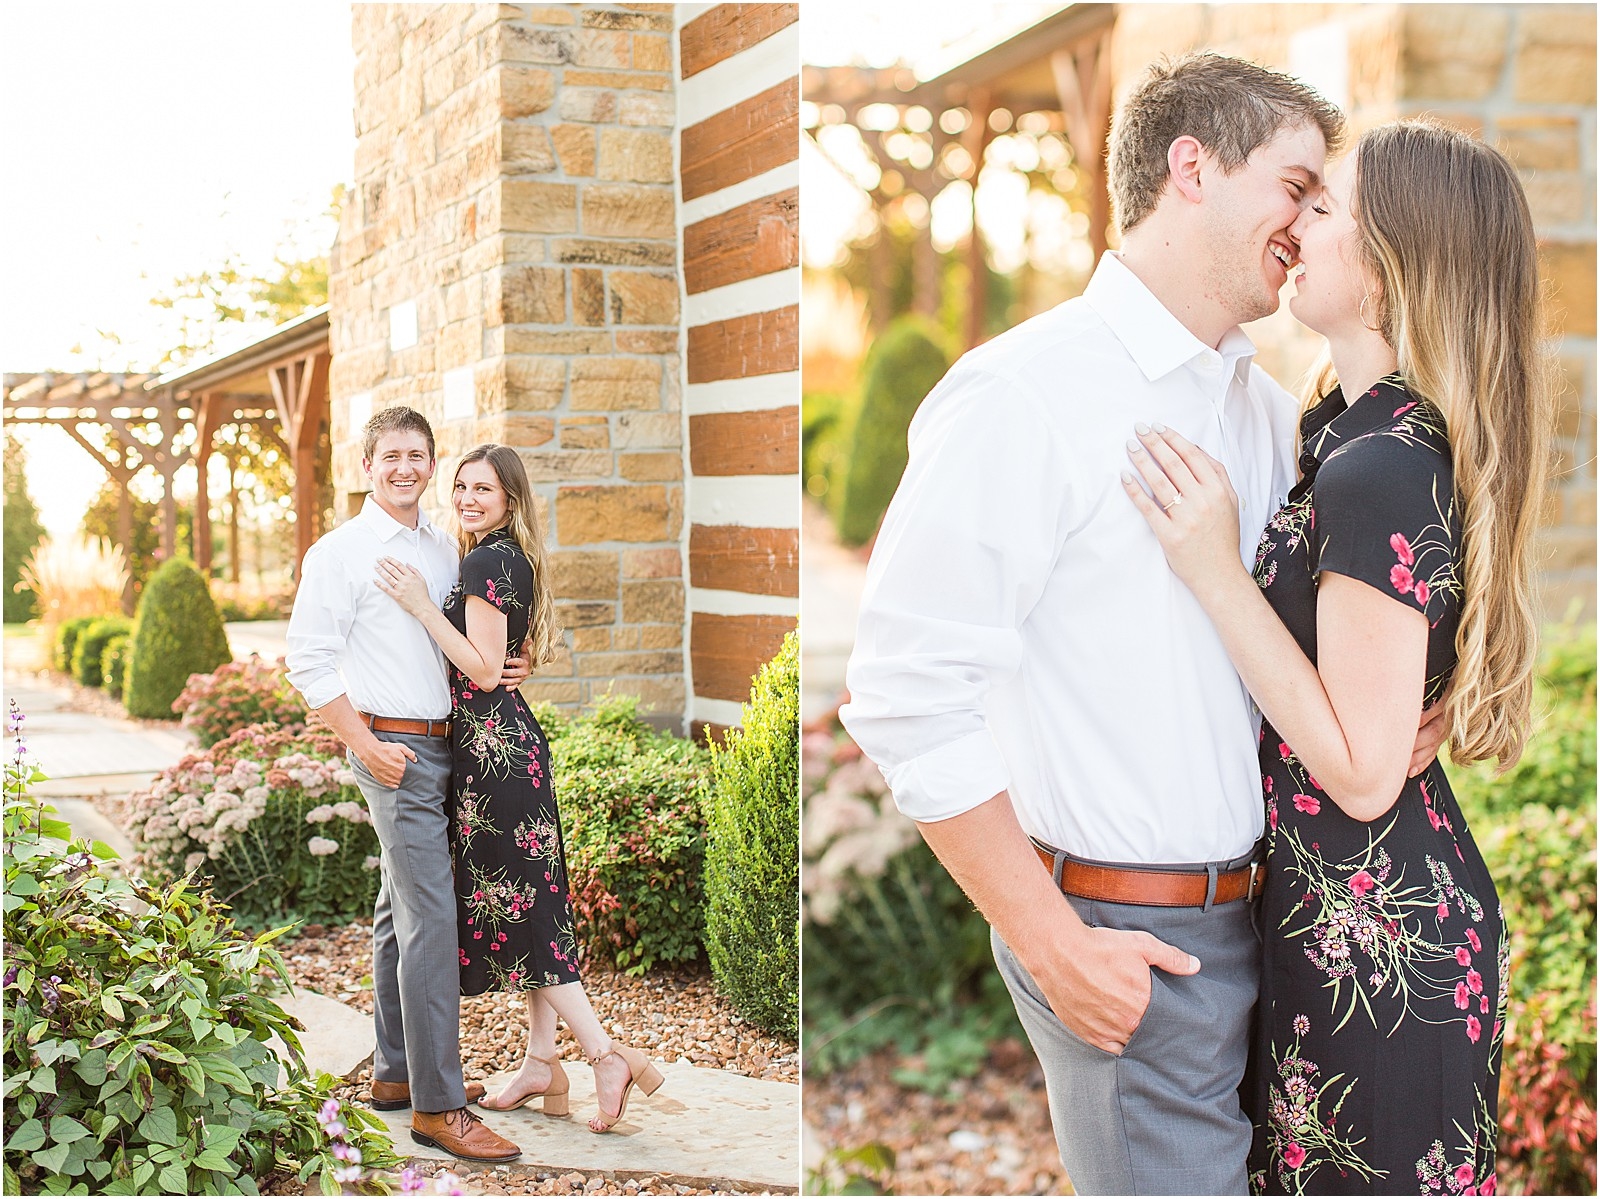 A Jasper Indiana Engagement Session | Tori and Kyle | Bret and Brandie Photography024.jpg